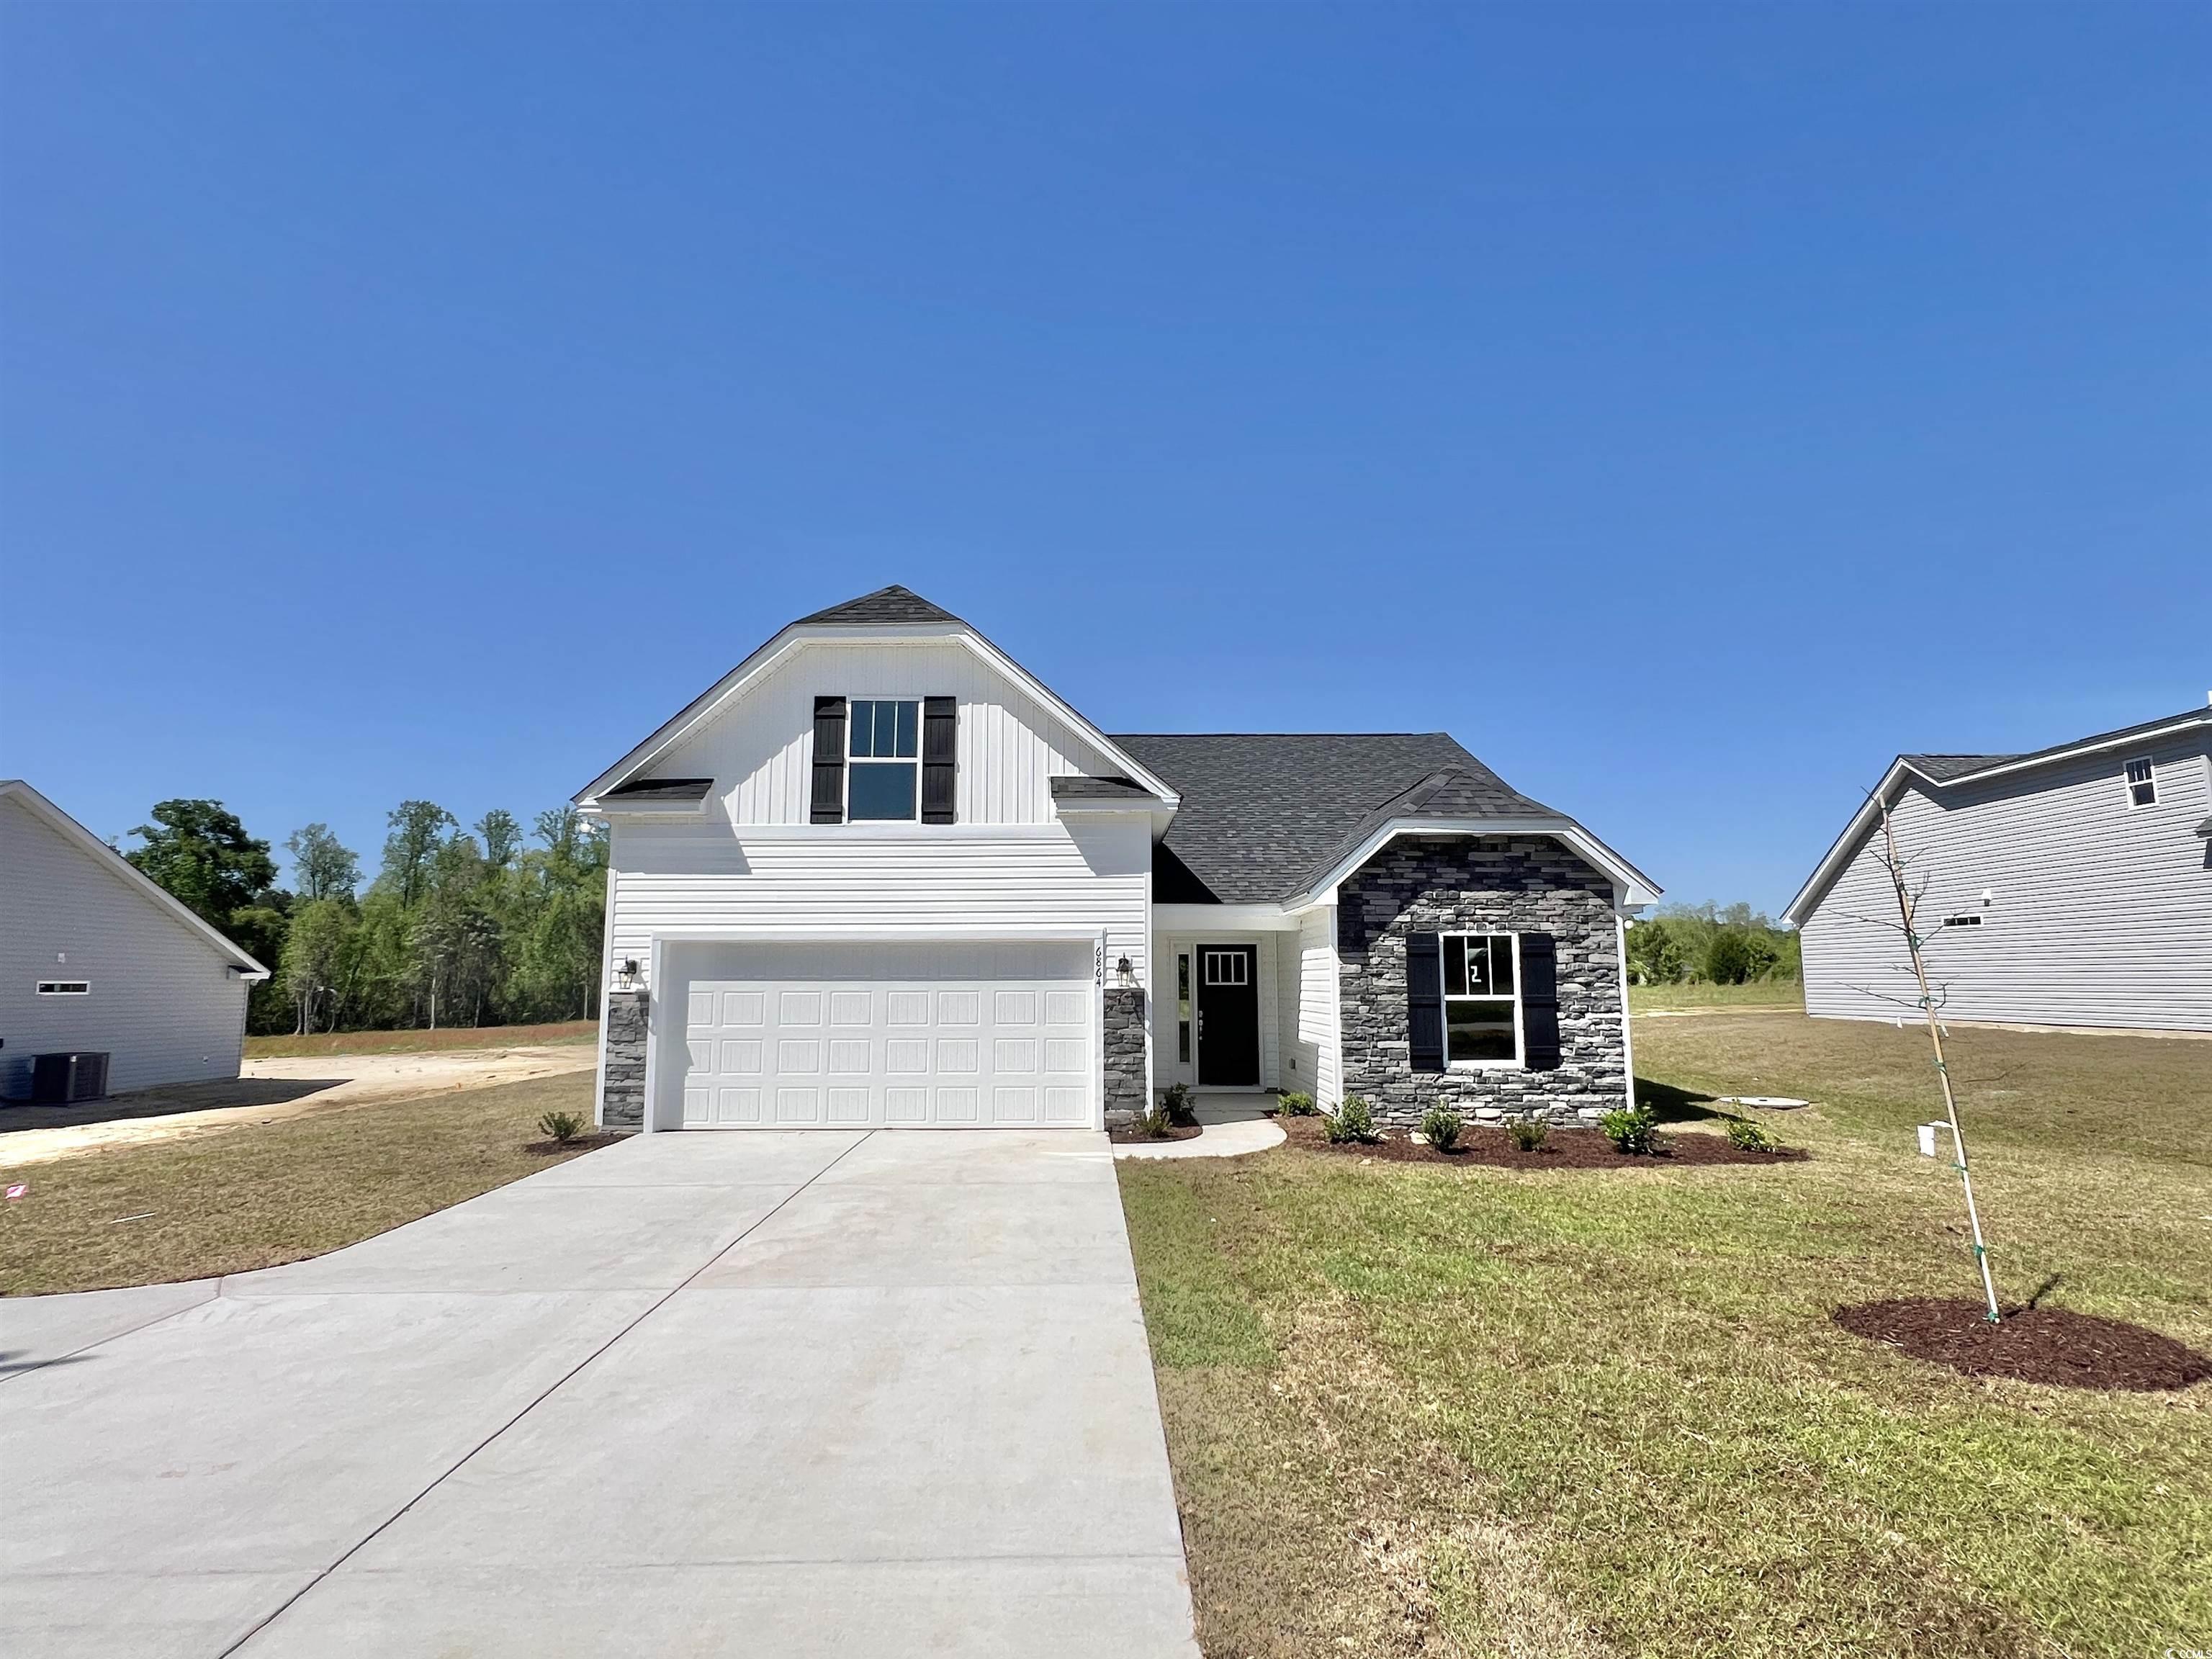 new construction, 4br/3bath home on 1/2 acre lot!! have you been looking for a new, no hoa home on a large lot close to the beach, but away from the hustle and bustle??? if so, this beauty is the one!!! bring your rv, boat, utility trailer, and install your pool and detached building. this yard can accommodate it all!!! this well-appointed home features huge upgraded wood-look laminate flooring in the great room, dining area, and entry/hallway, granite countertops in the kitchen, tile flooring in the bathrooms, laundry and kitchen, double vanity and custom tile walk-in shower & soaker tub in the master bath, vaulted ceilings & ceiling fans in living room and all the bedrooms, and an irrigation system to keep your yard green during the summer months. this home has a very peaceful setting in conway yet offers a short drive to all the grand strand has to offer. as the new owner of this gorgeous home you'll never be far away from golfing, fishing, dining, shopping... sand, sun and fun!!! **primary photo and backyard are of actual home. others are of another similar home. updated photos coming soon**